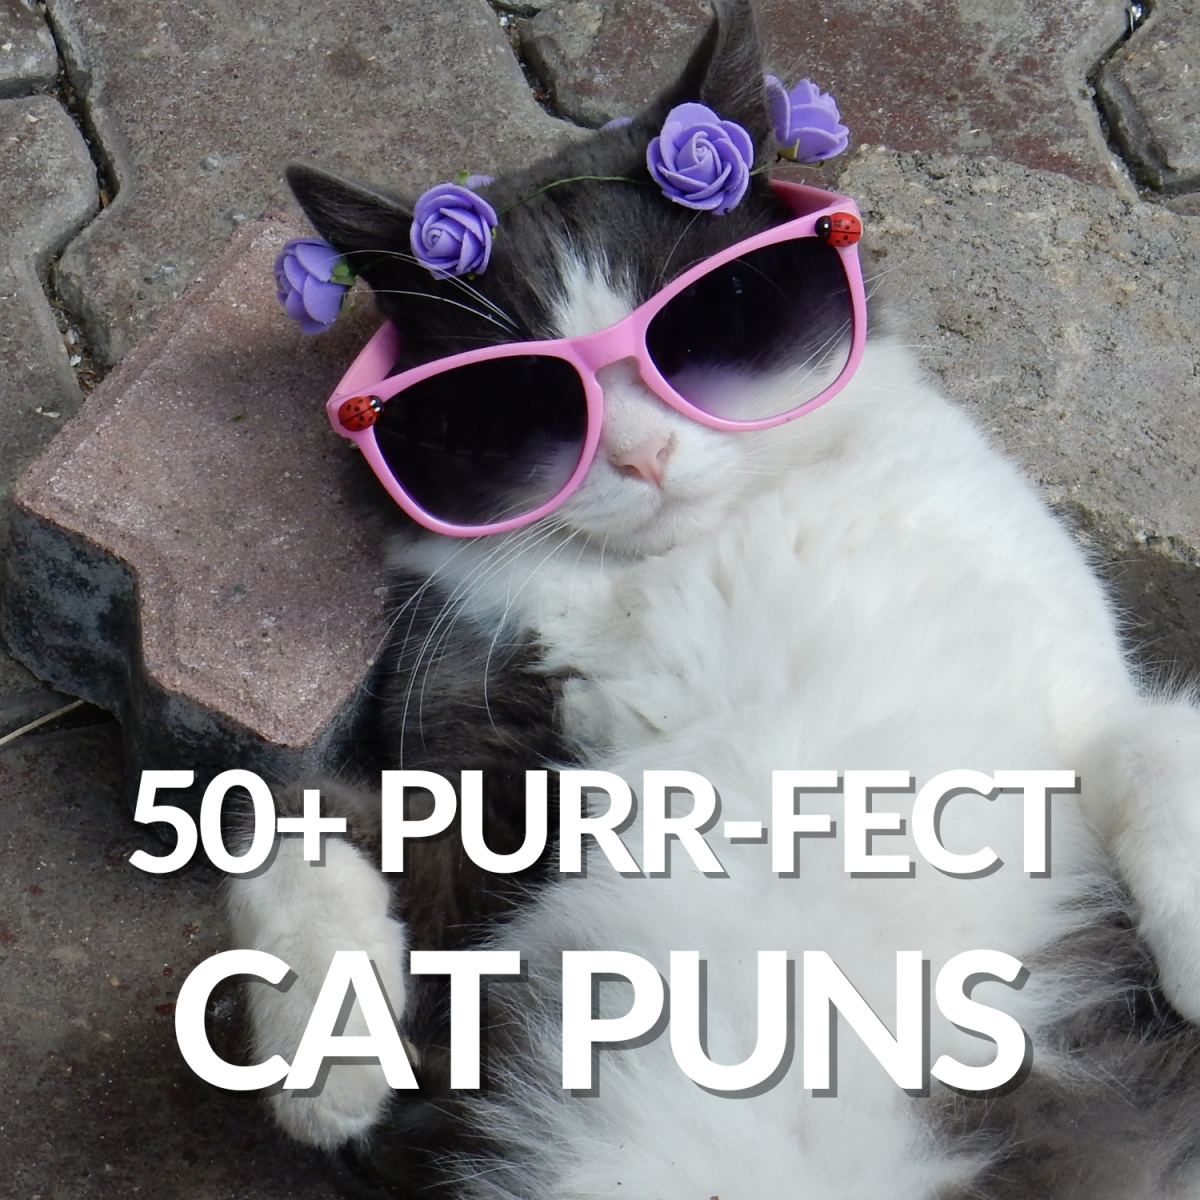 60+ Purr-fect Cat Puns That Are Totally Paw-some